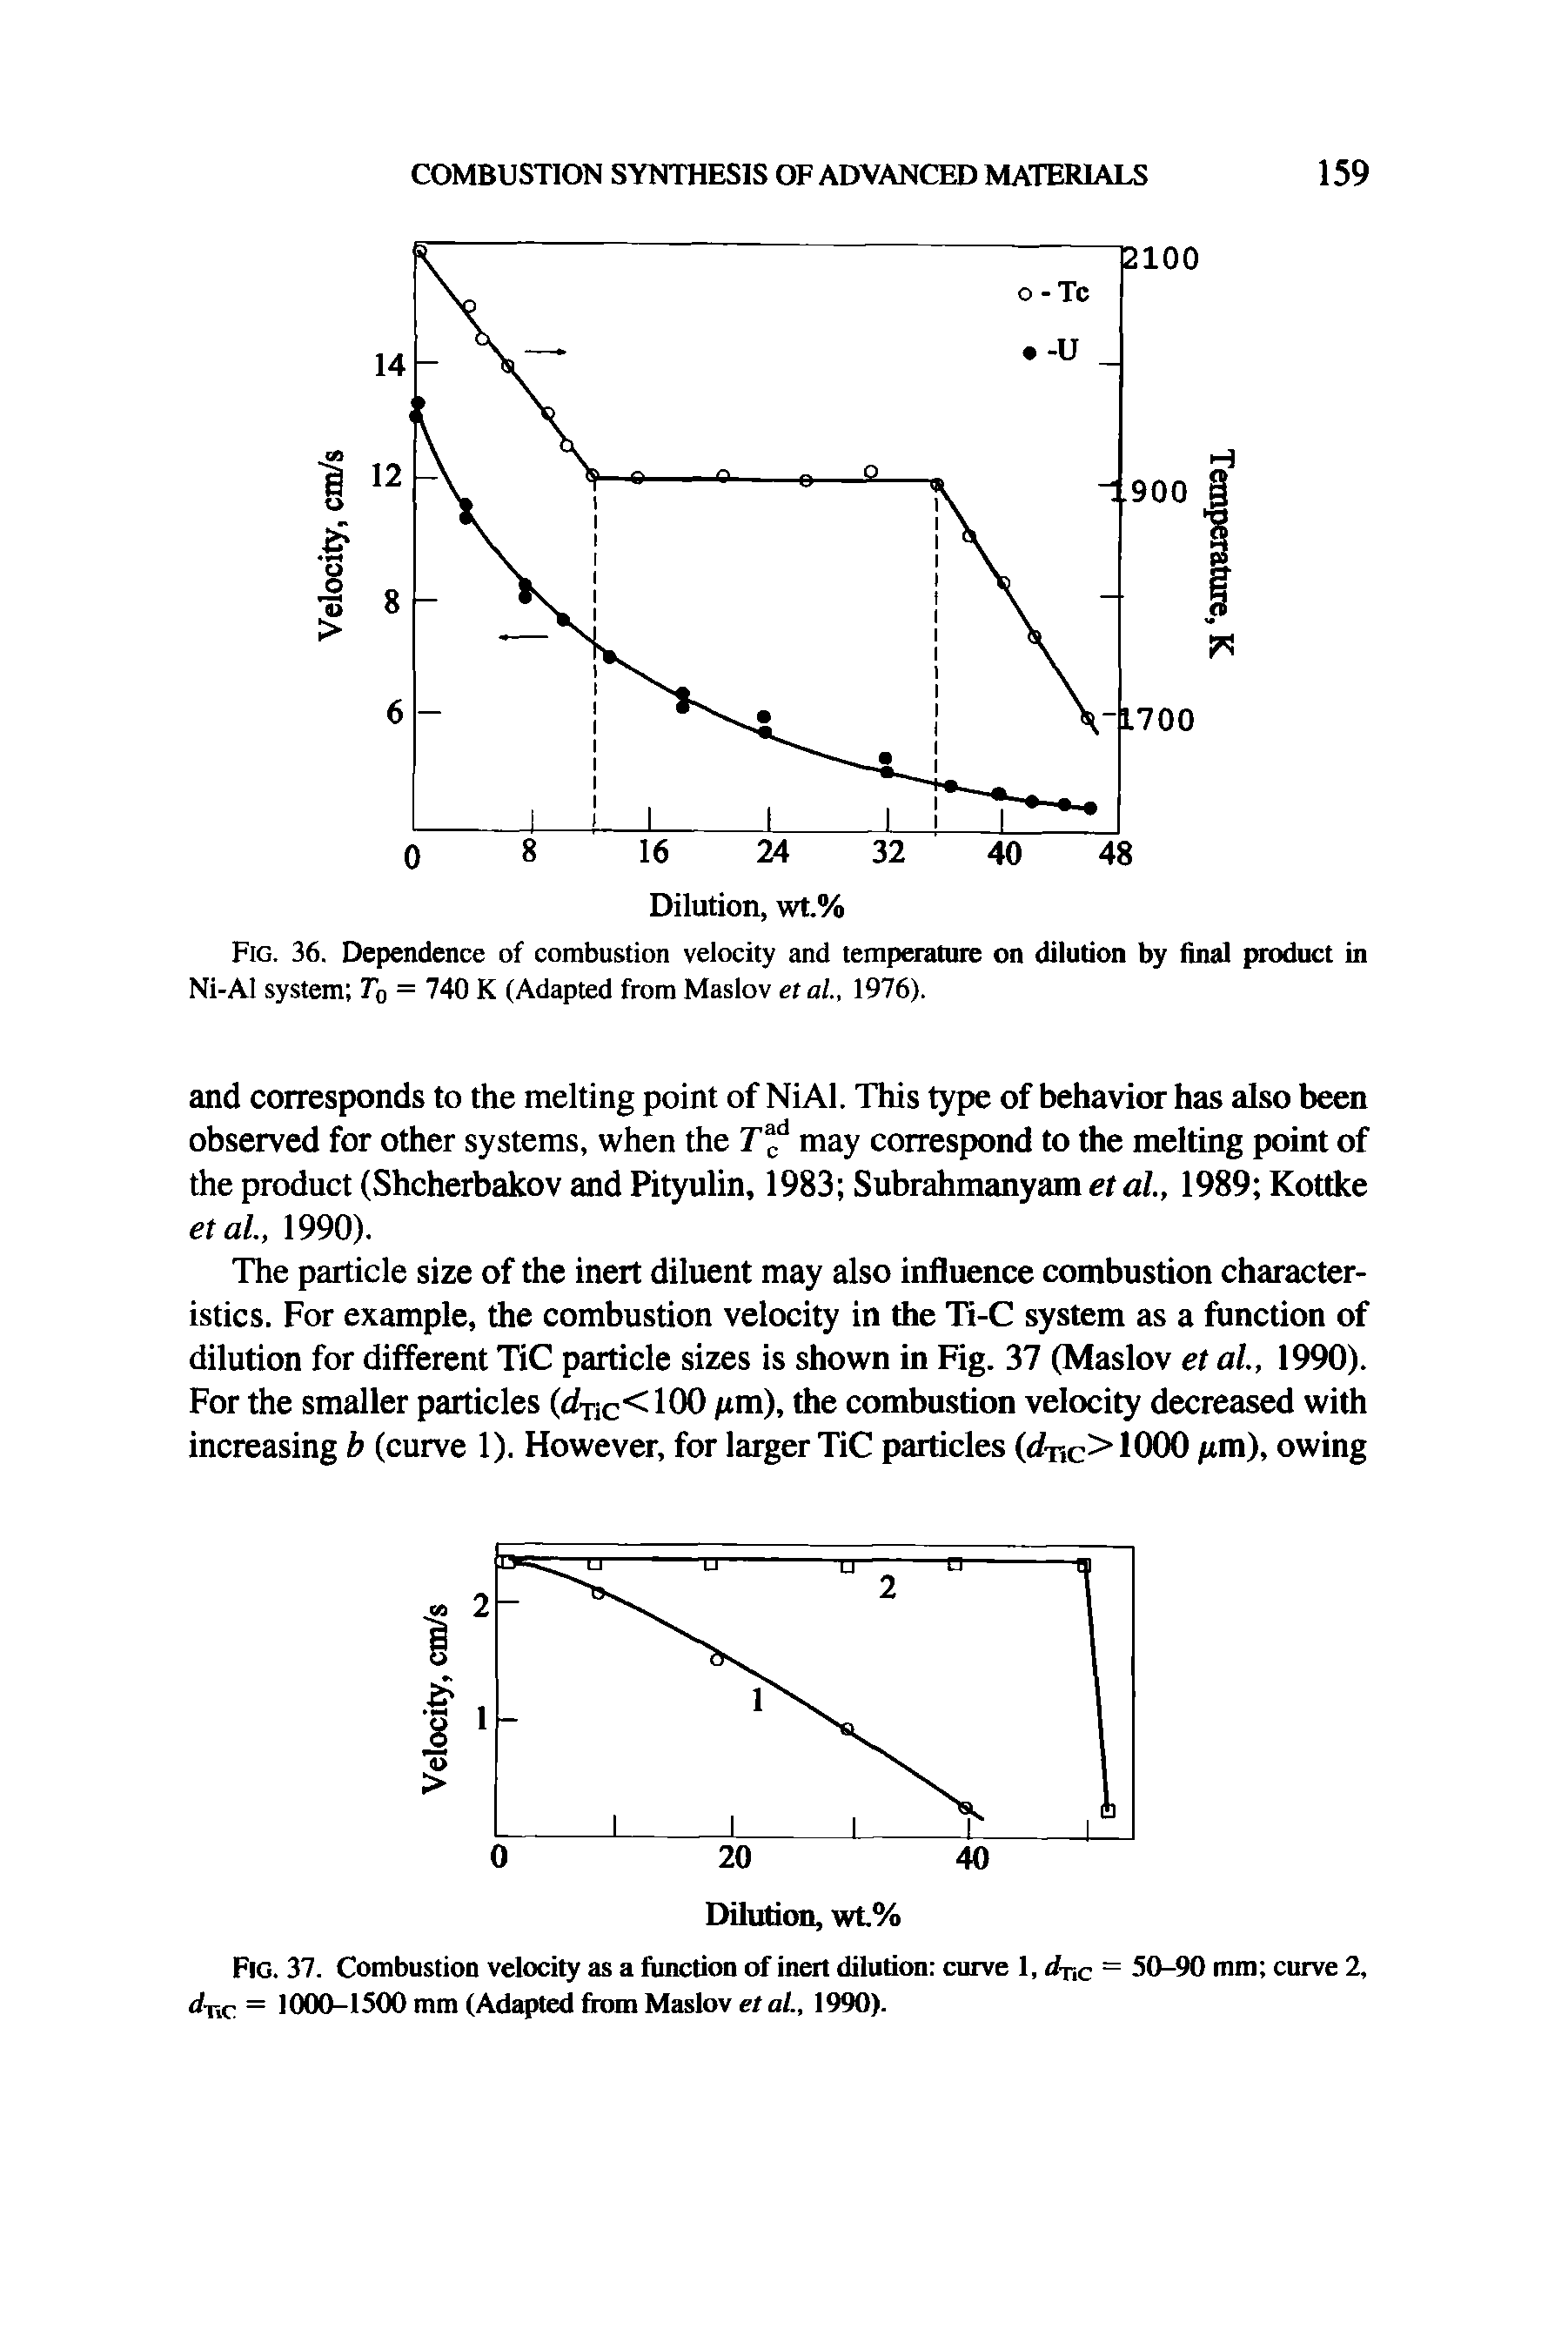 Fig. 37. Combustion velocity as a function of inert dilution curve 1, rfnc = 50-90 mm curve 2, dr,c = 1000-1500 mm (Adapted from Maslov et al., 1990).